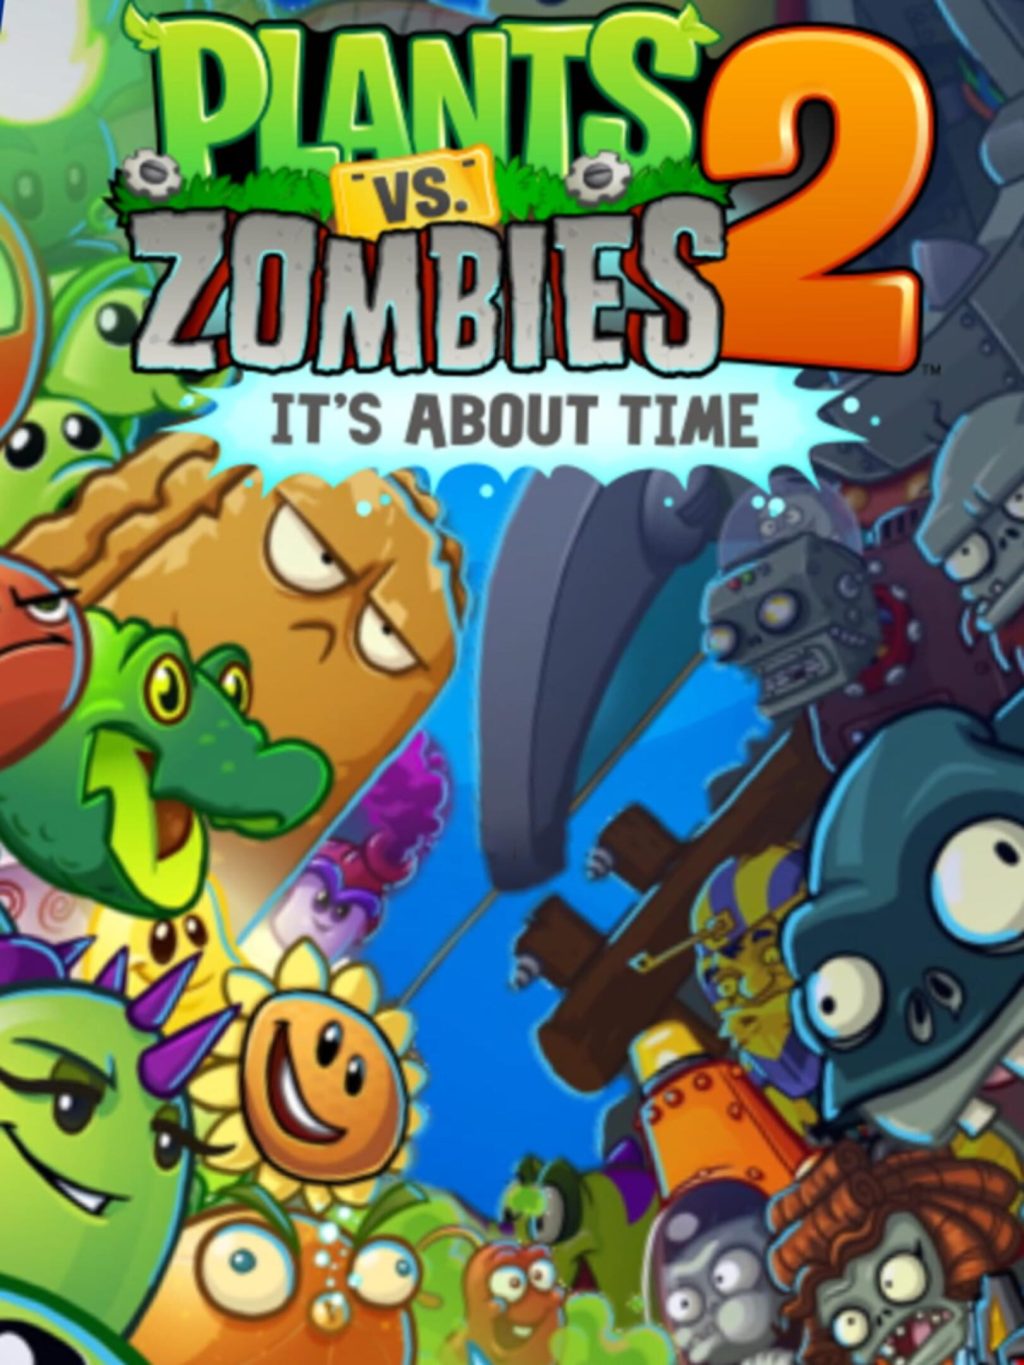 Plants vs. Zombies 2: It's About Time News, Guides, Walkthrough,  Screenshots, and Reviews - GameRevolution